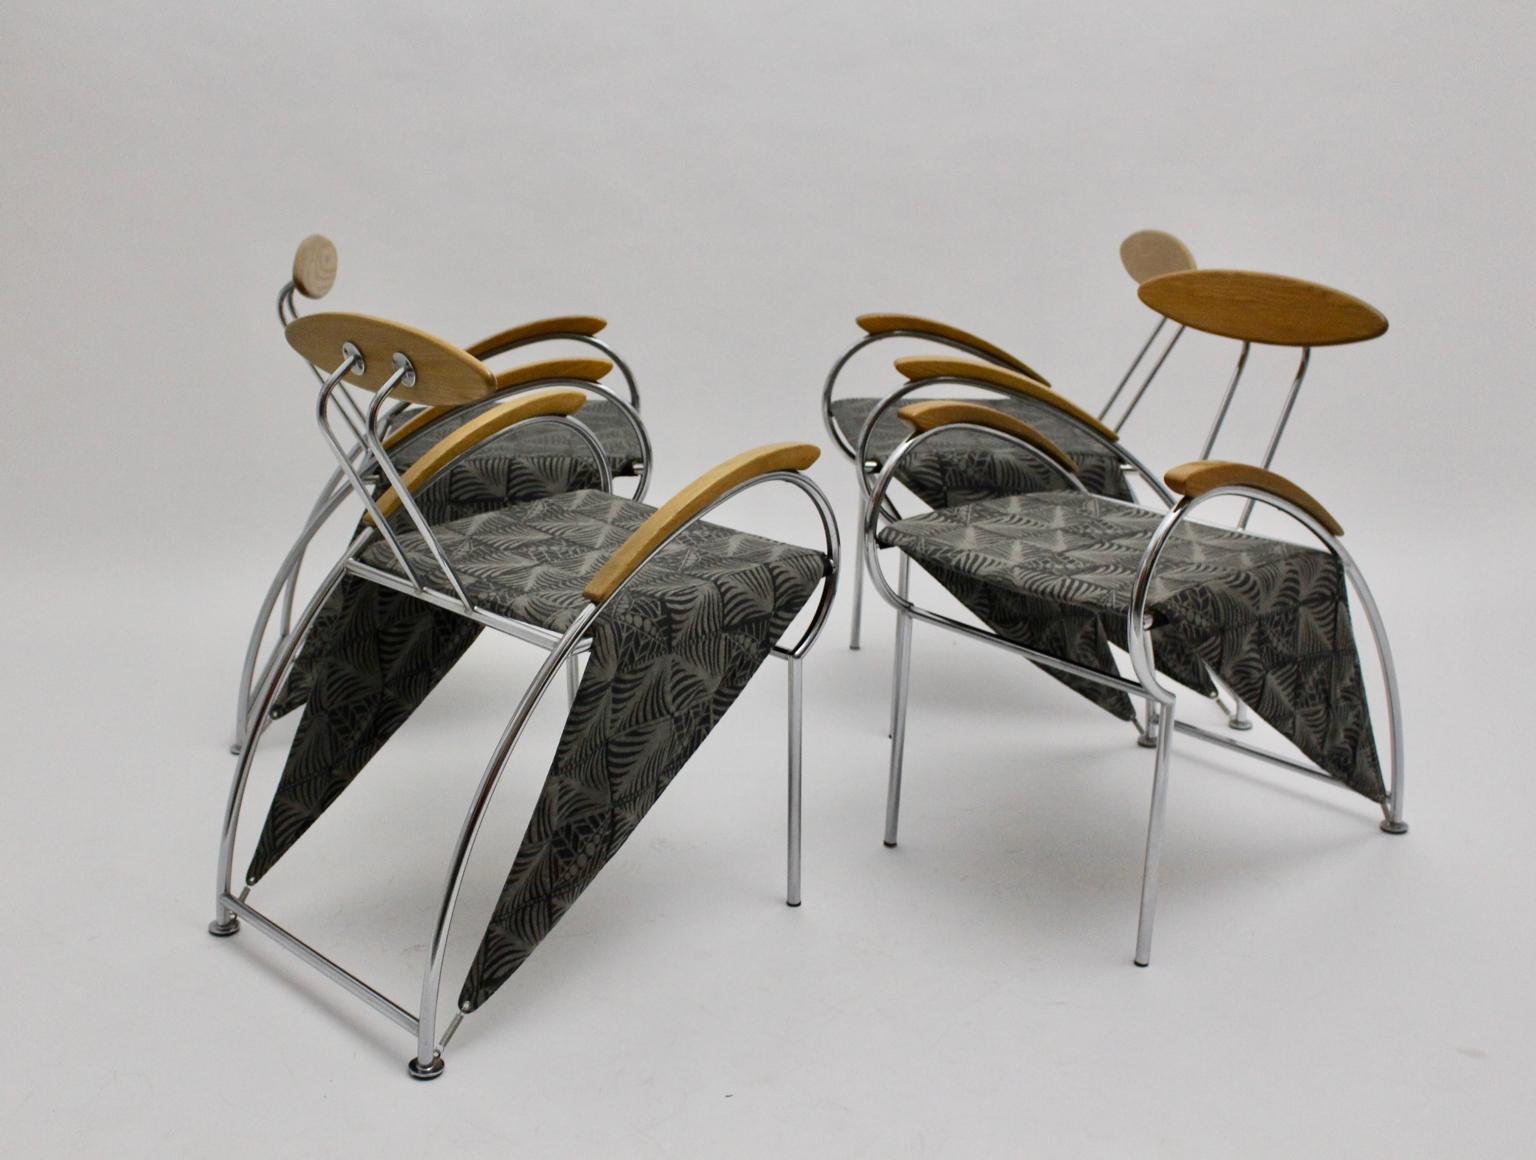 Postmodern Set of Four Vintage Dining Chair Massimo Iosa Ghini Moroso 1988 Italy For Sale 3